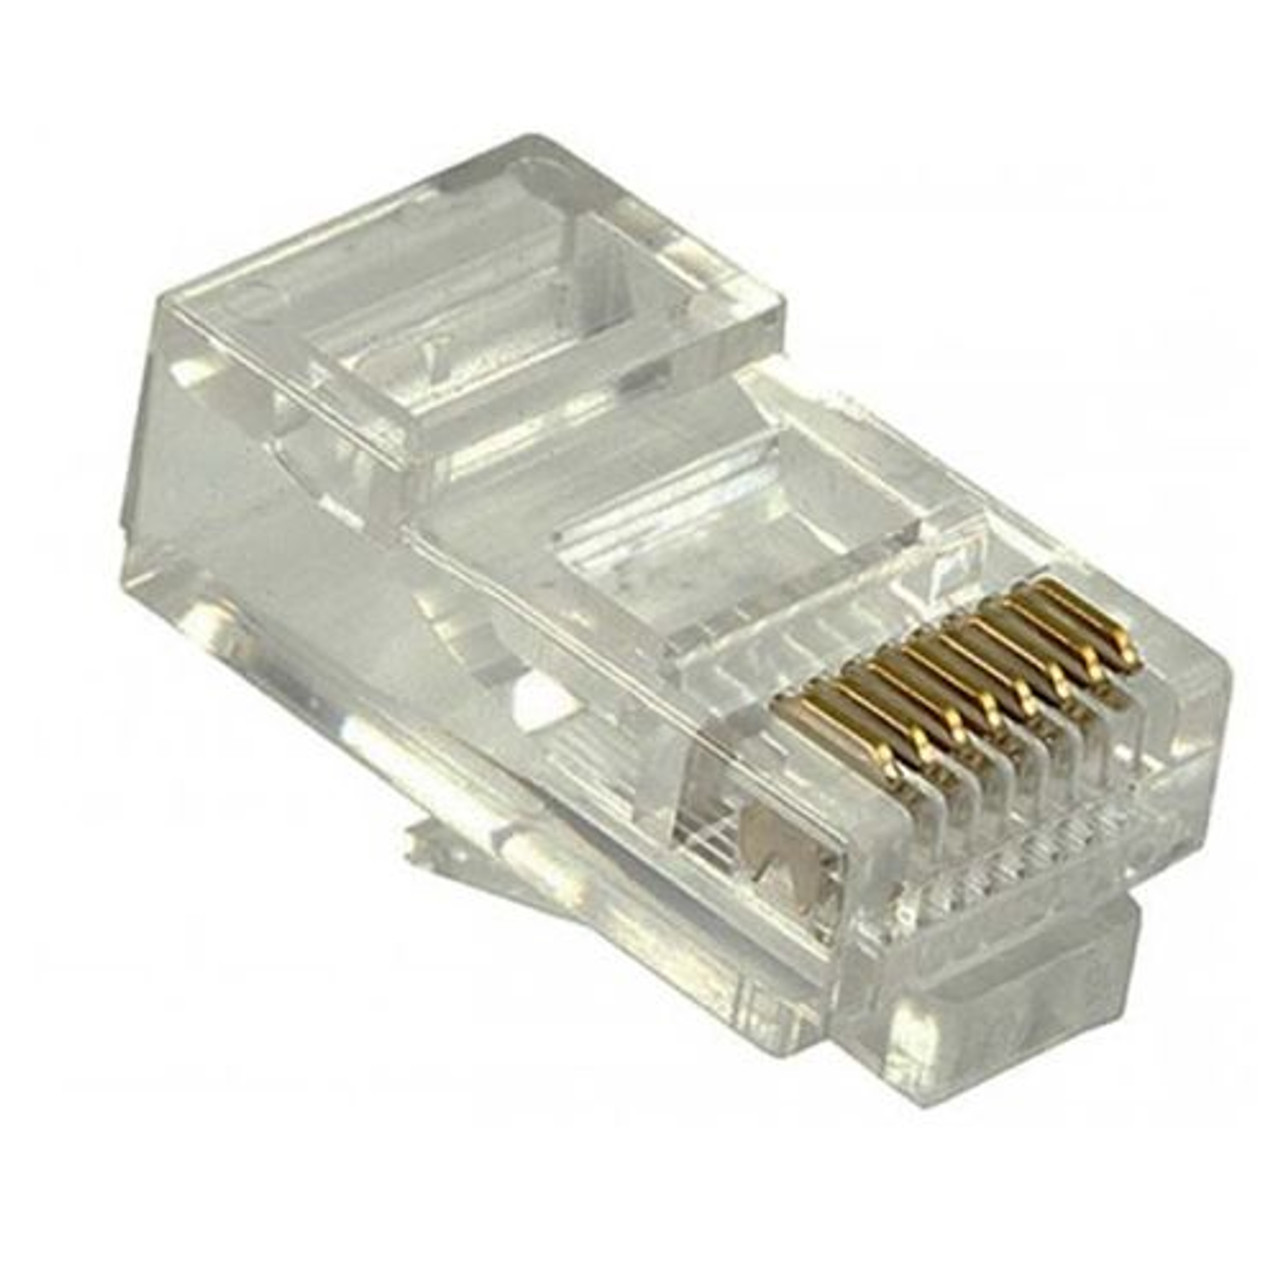 Steren 300-168-50 RJ45 Plug Connector Solid Round 50 Pack Modular 8P8C 8X8 Plug 24-26 AWG 6 Micron 24K Gold Plated 8 Pin Male Network Connector Data Telephone Line RJ-45 Plugs